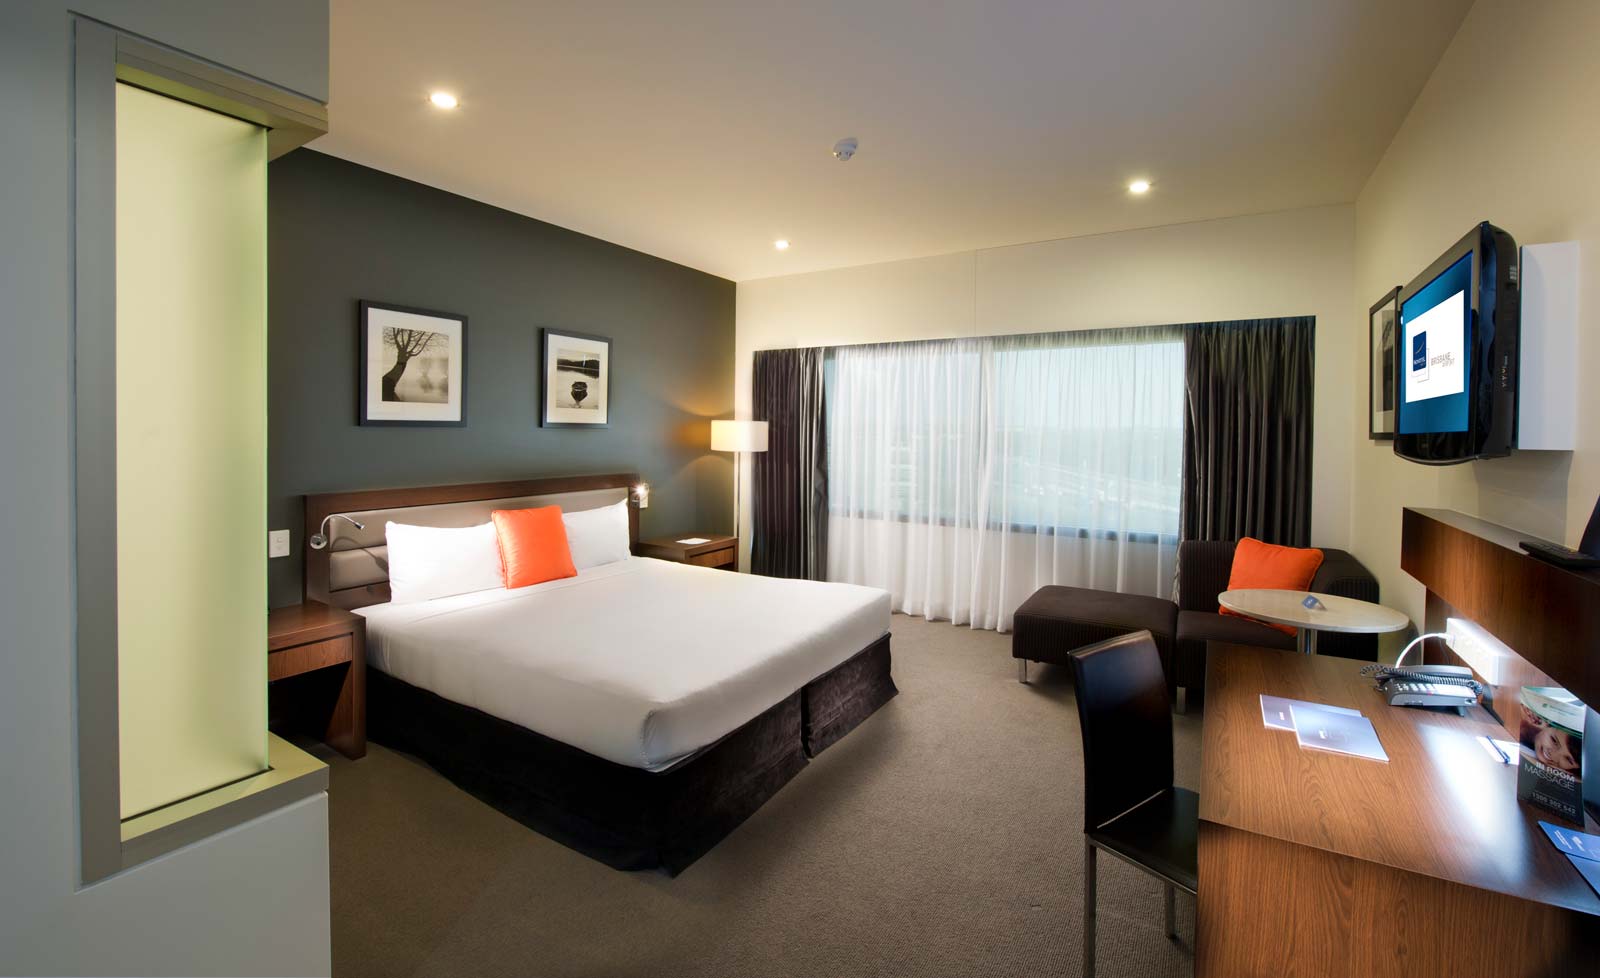 King Room at Novotel Brisbane Airport near Skygate